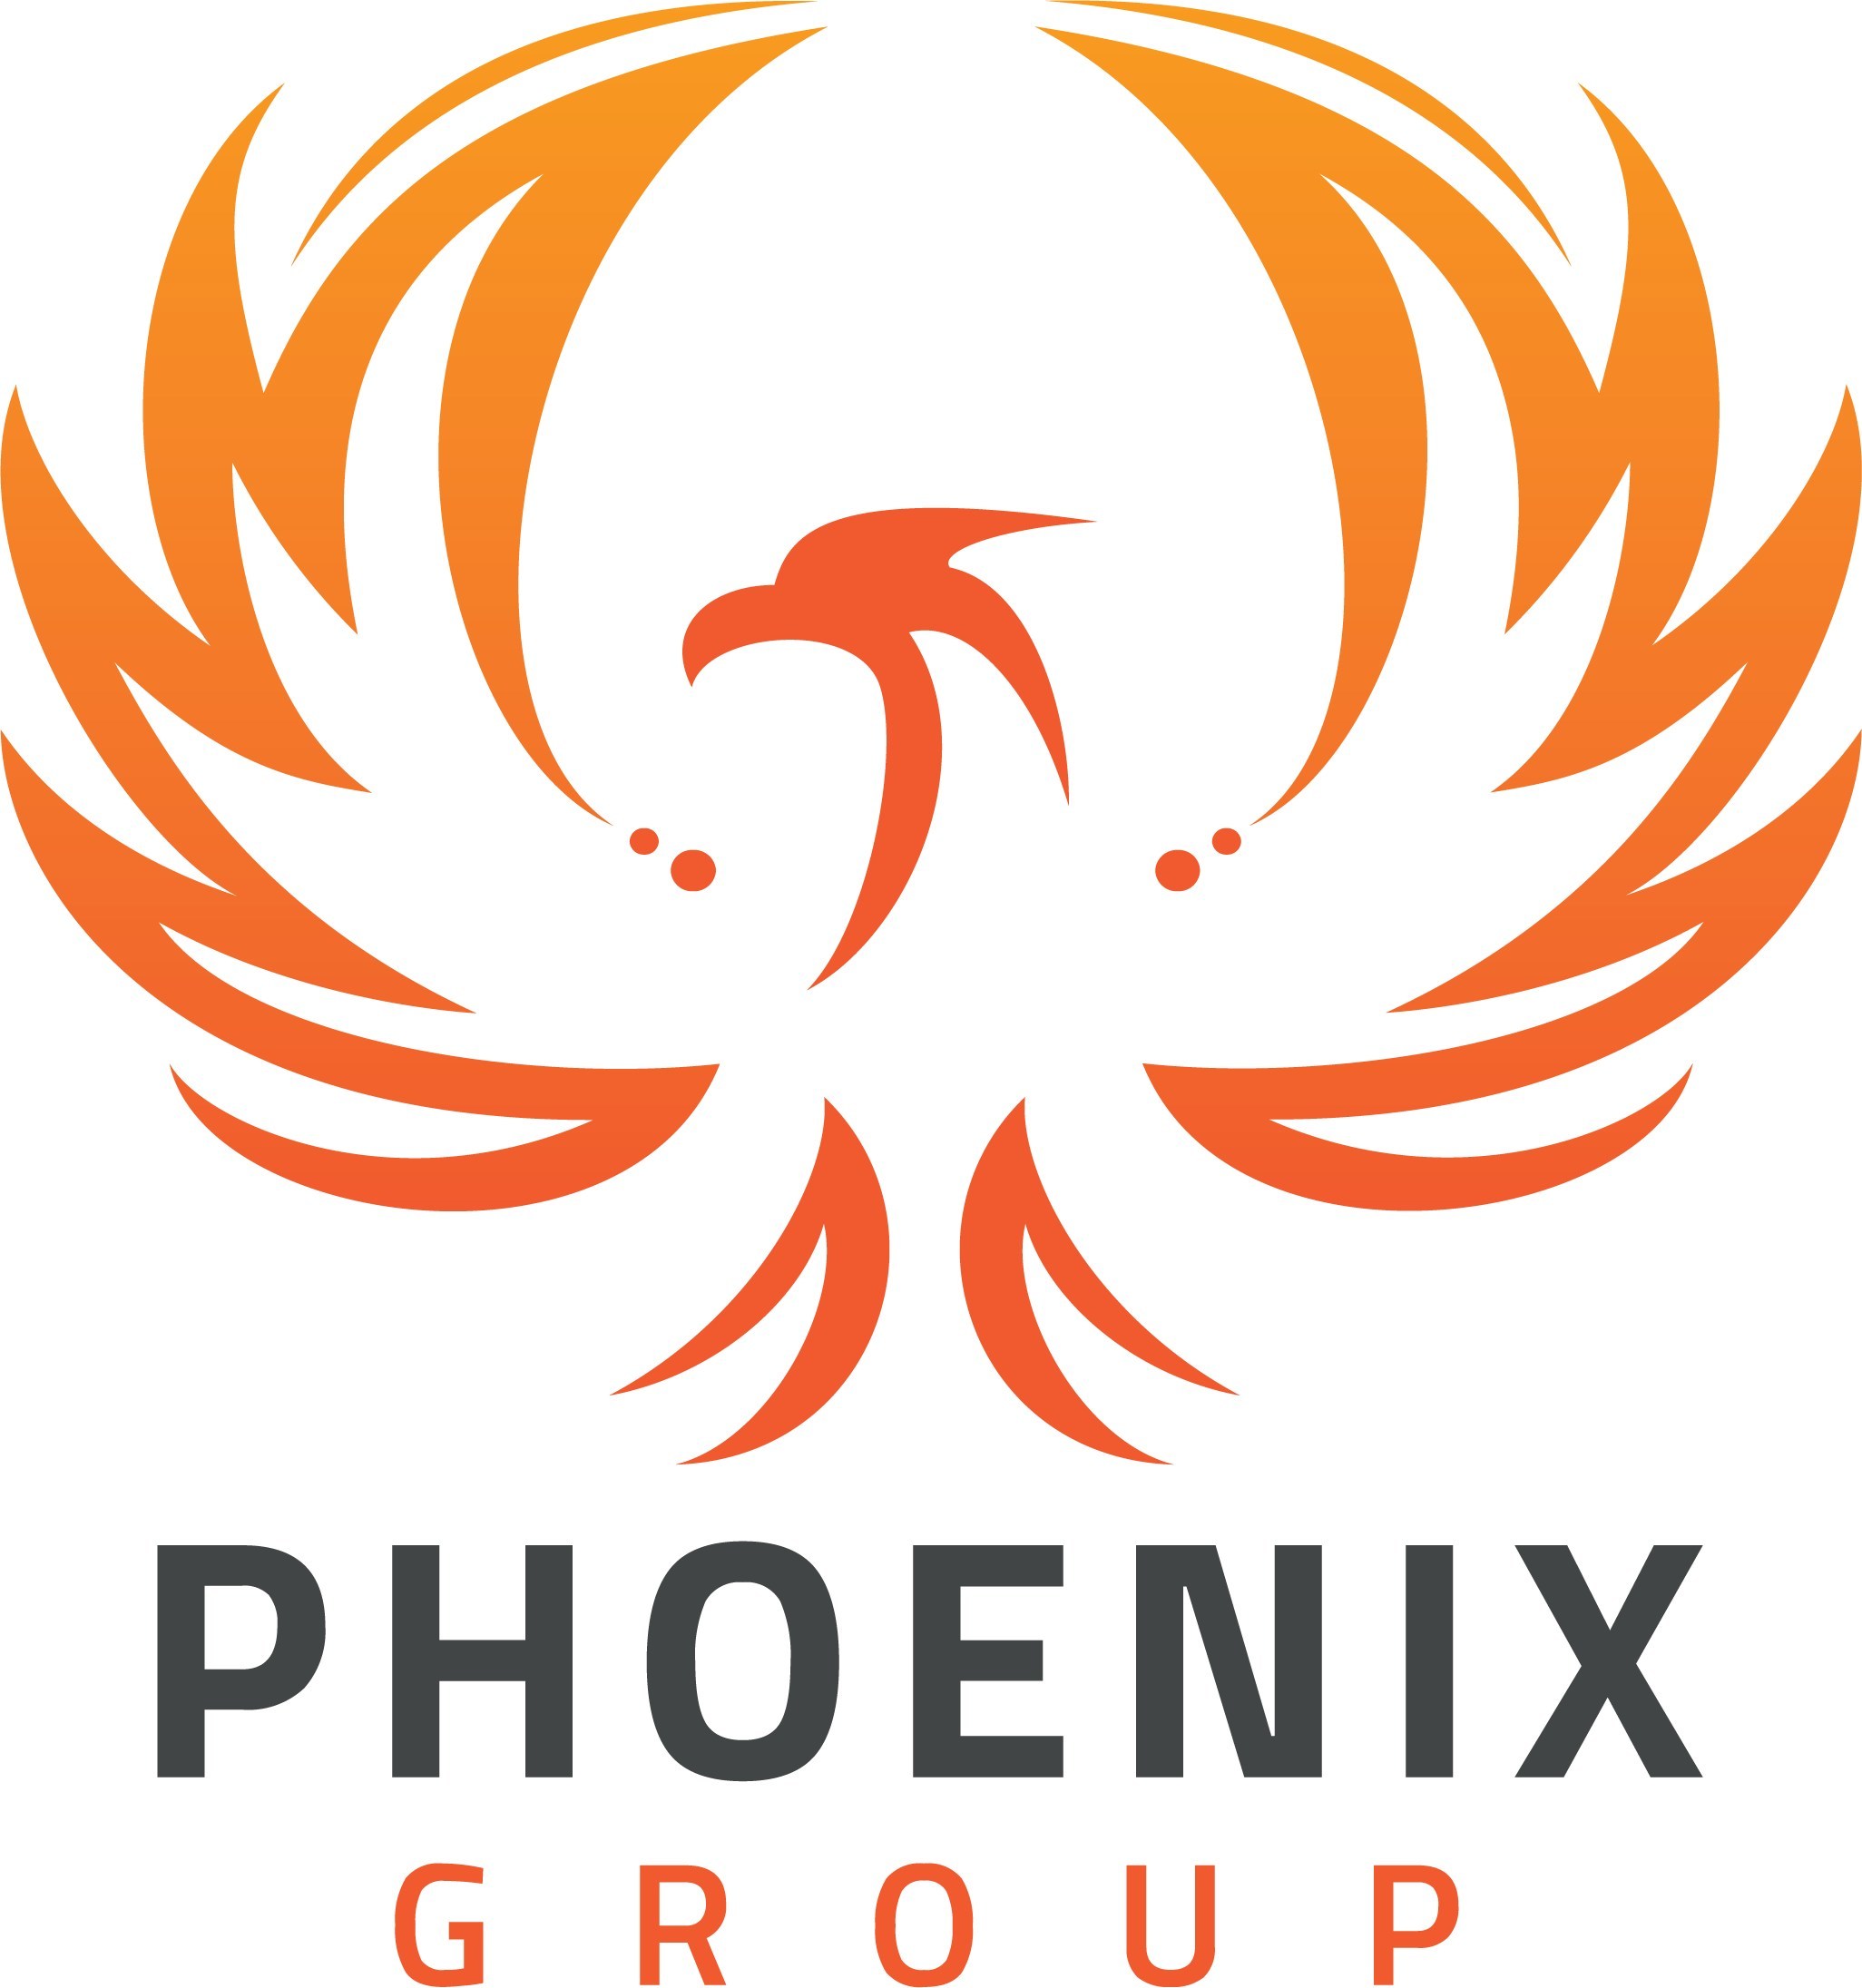 The Phoenix Group granted a second patent for MIDAS®